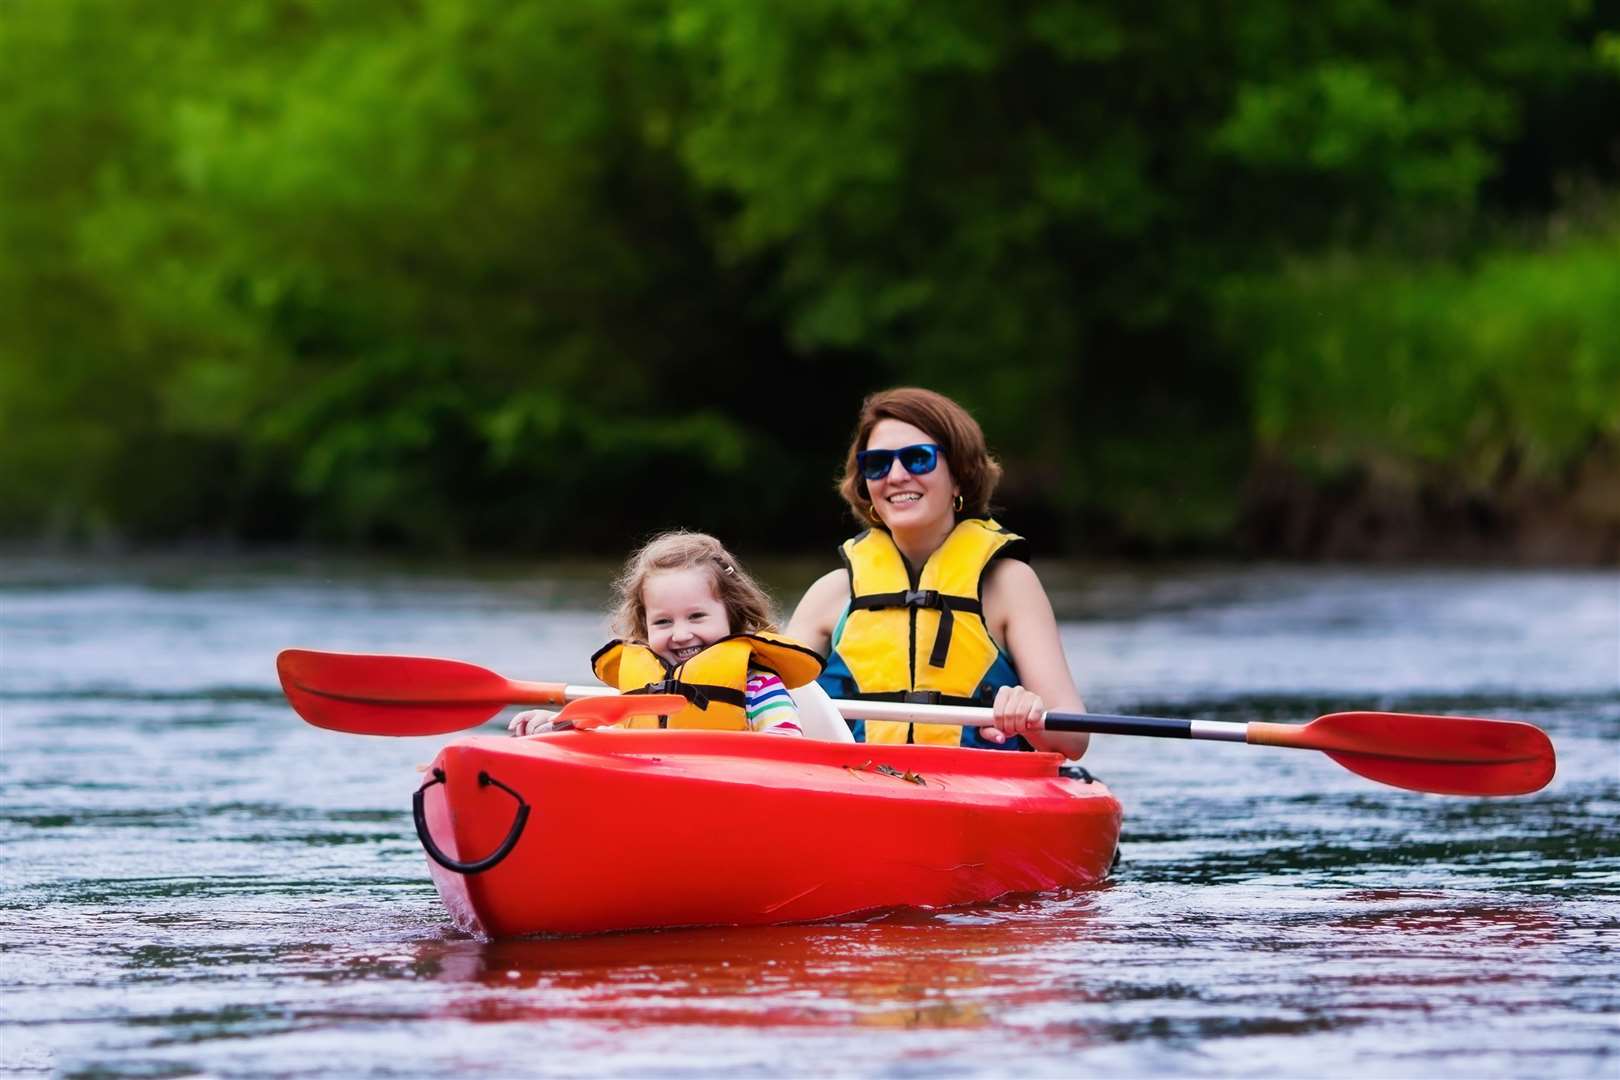 Families looking for an outing could hire a canoe or kayak in Kent